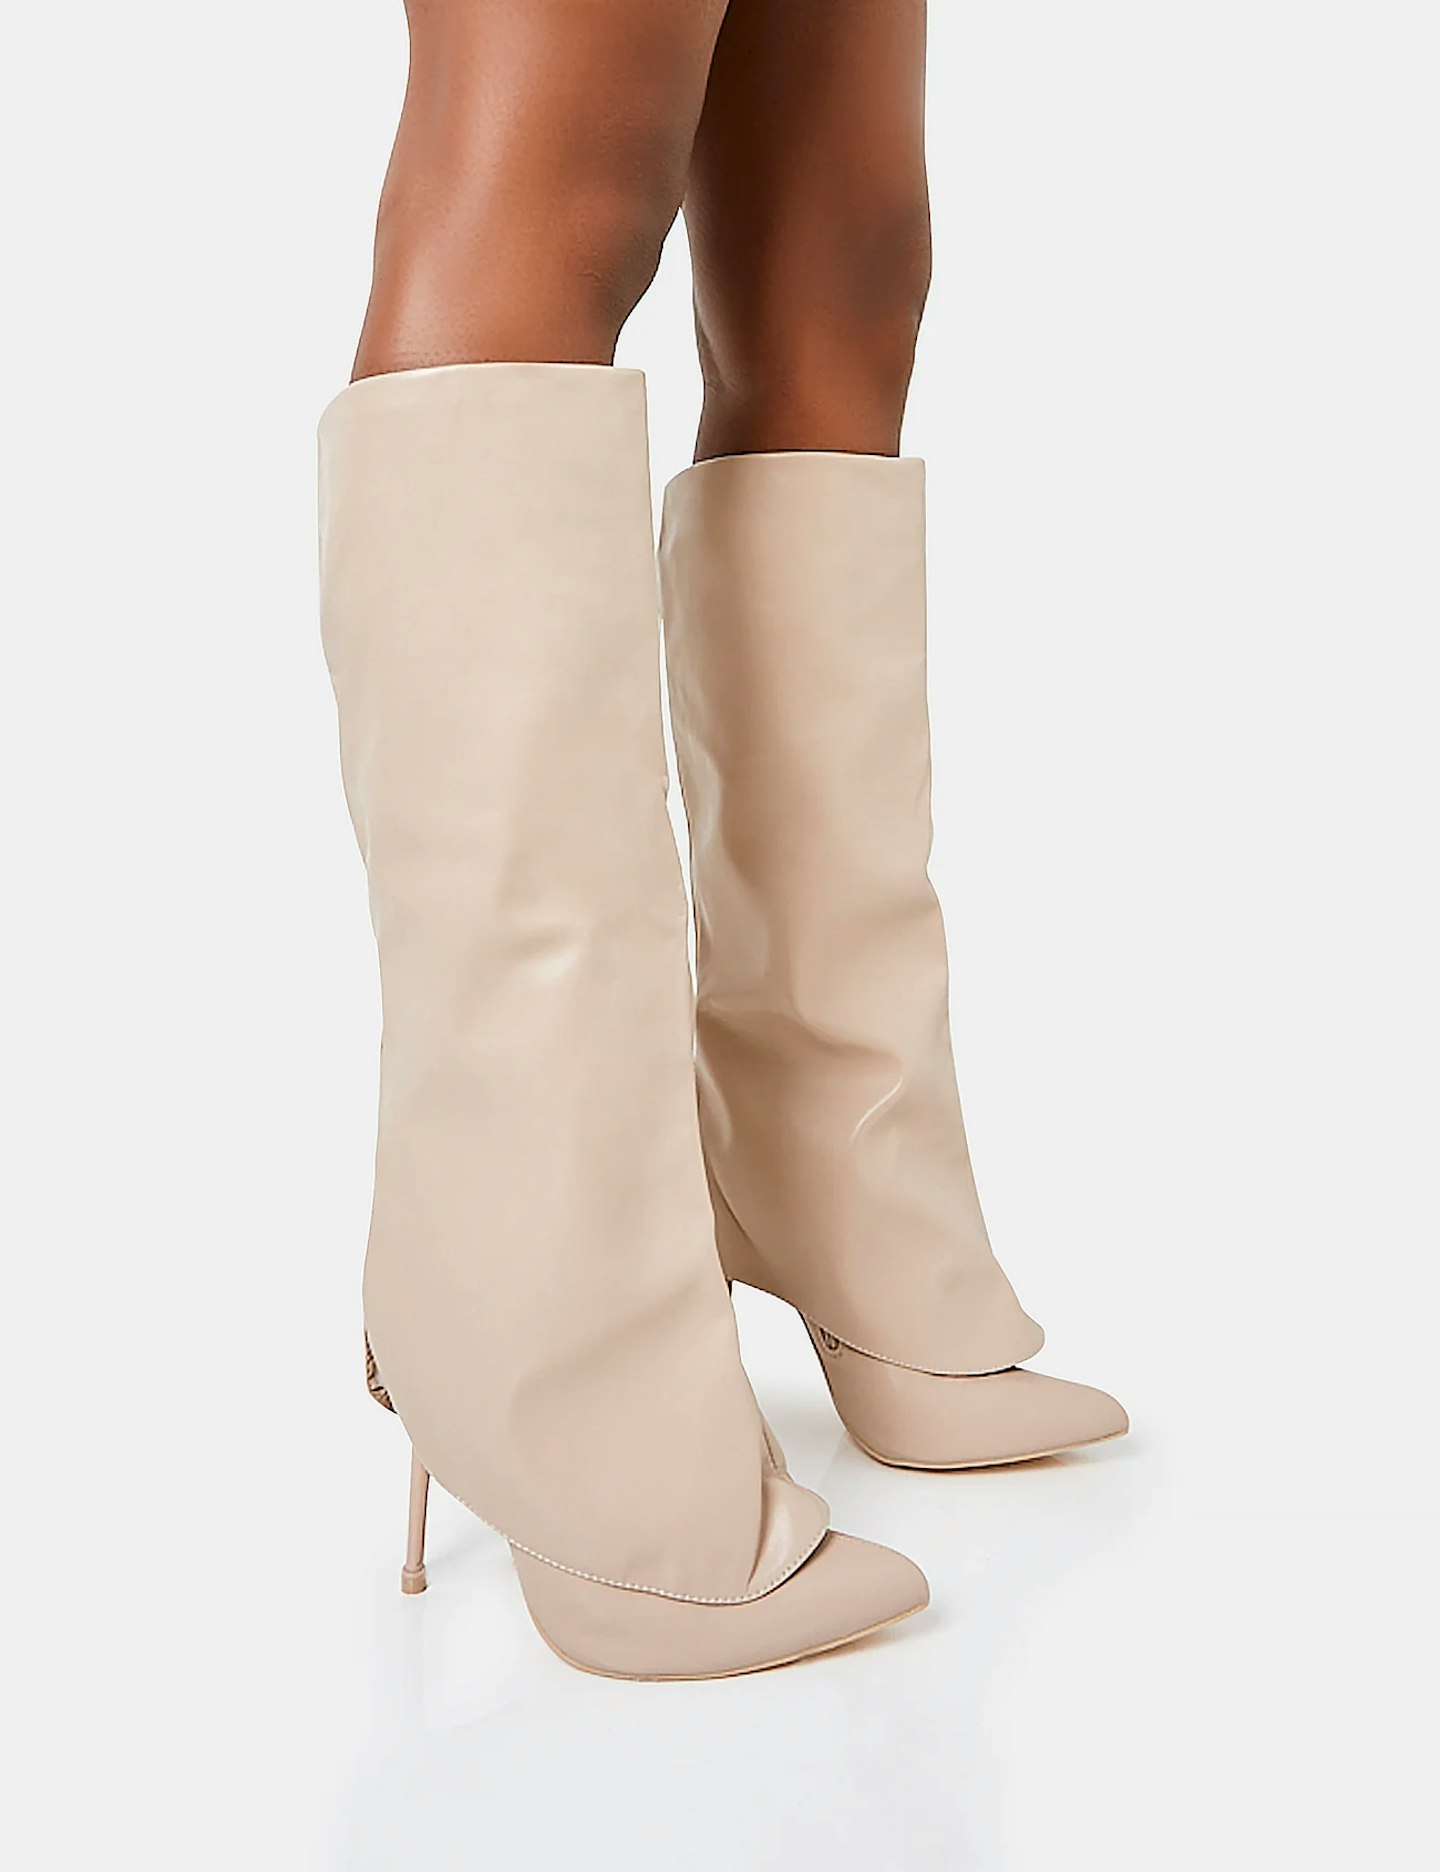 Public Desire All Yours Nude Pu Fold Over Pointed Toe Stiletto Knee High Boots